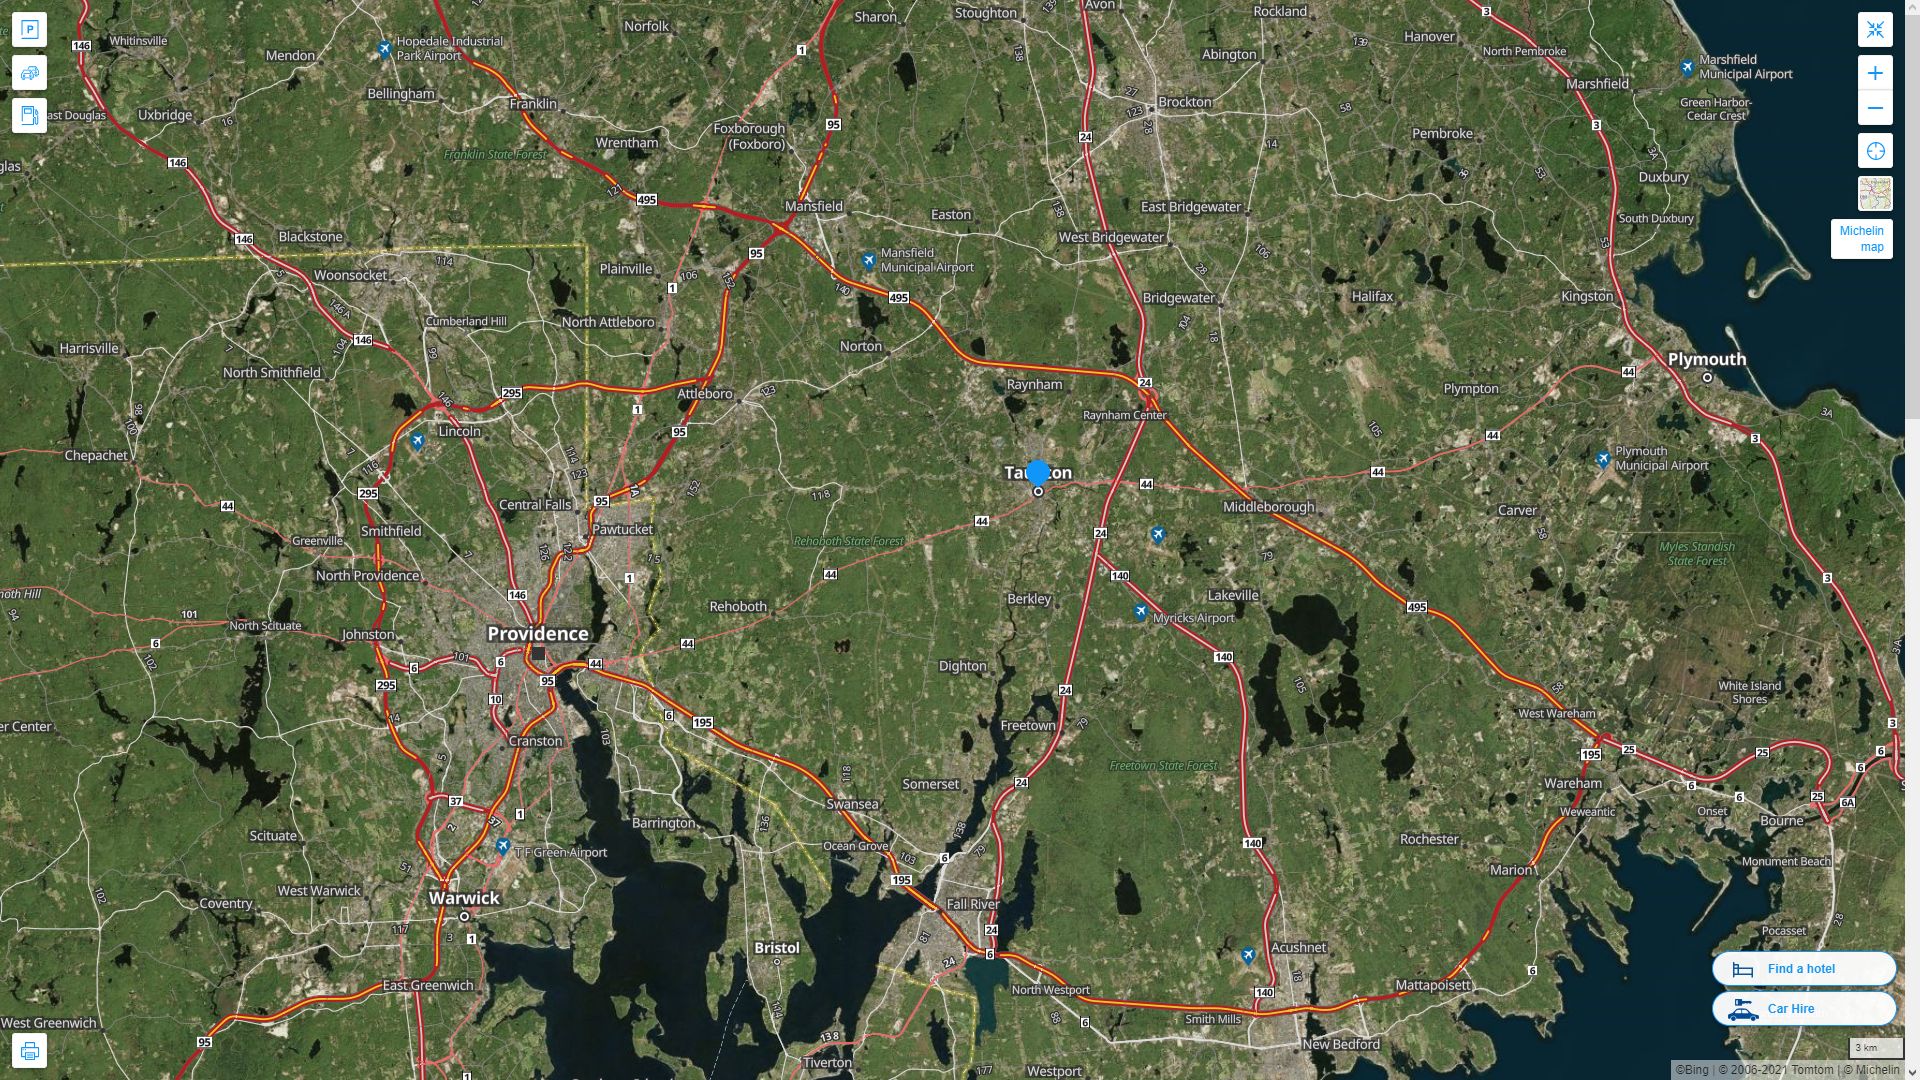 Taunton Massachusetts Highway and Road Map with Satellite View